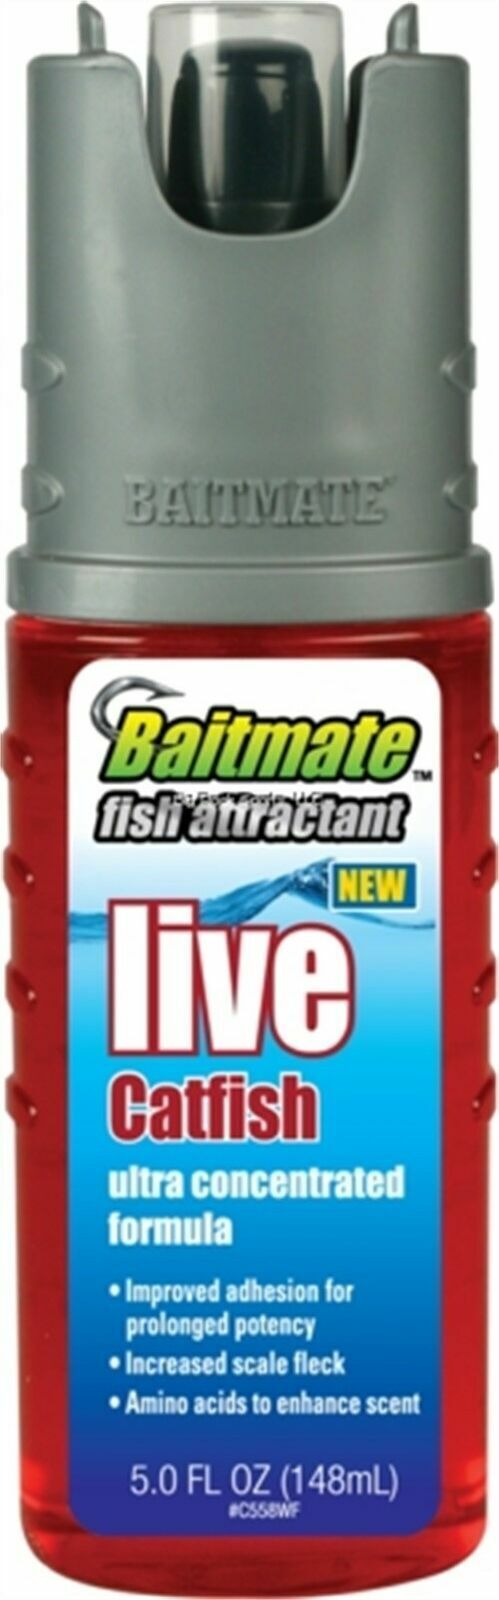 Baitmate Live Catfish Scented Fish Attractant, 5 Fluid-Ounce Fast Shipping!